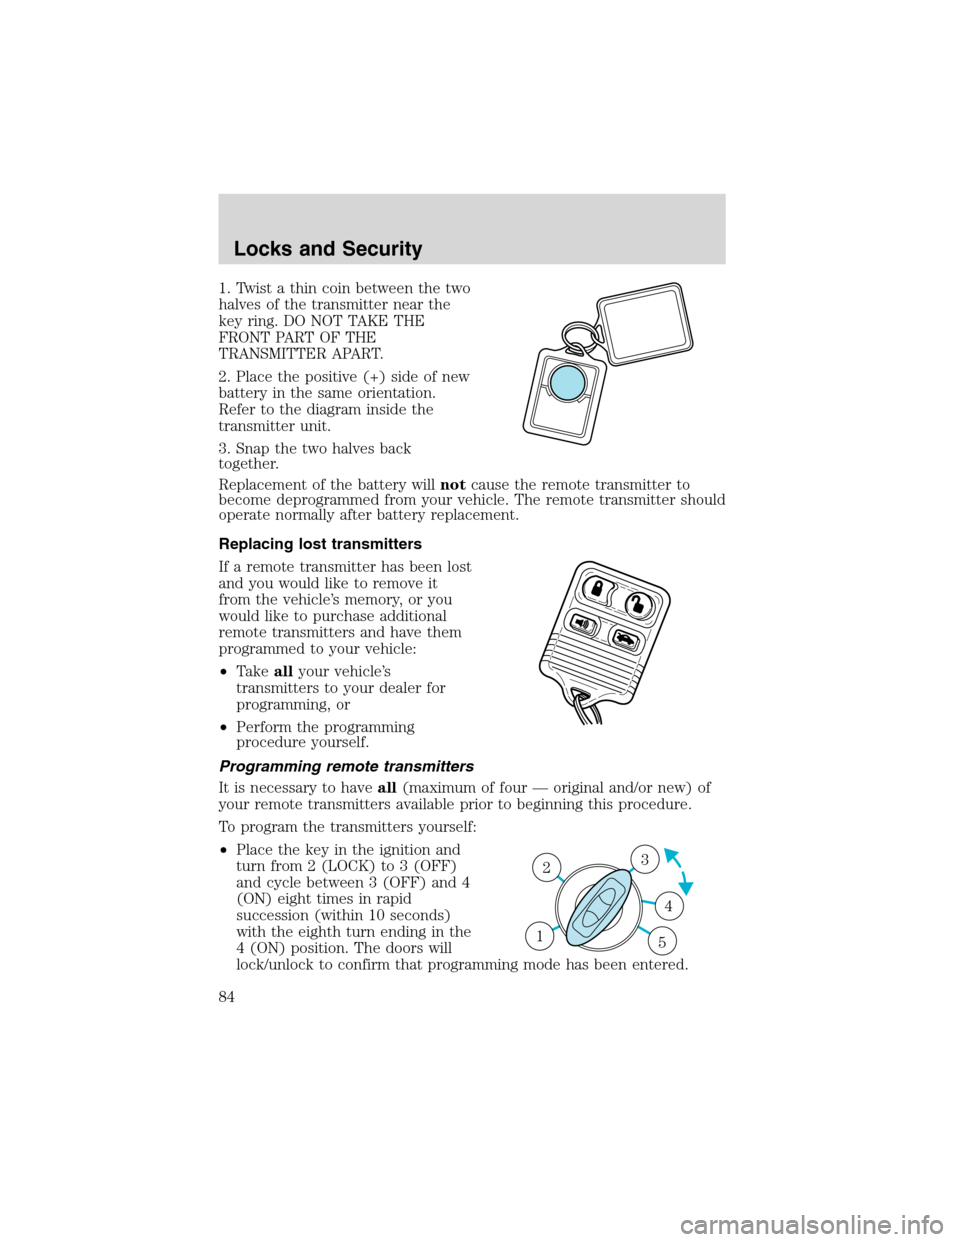 Mercury Sable 2002  Owners Manuals 1. Twist a thin coin between the two
halves of the transmitter near the
key ring. DO NOT TAKE THE
FRONT PART OF THE
TRANSMITTER APART.
2. Place the positive (+) side of new
battery in the same orienta